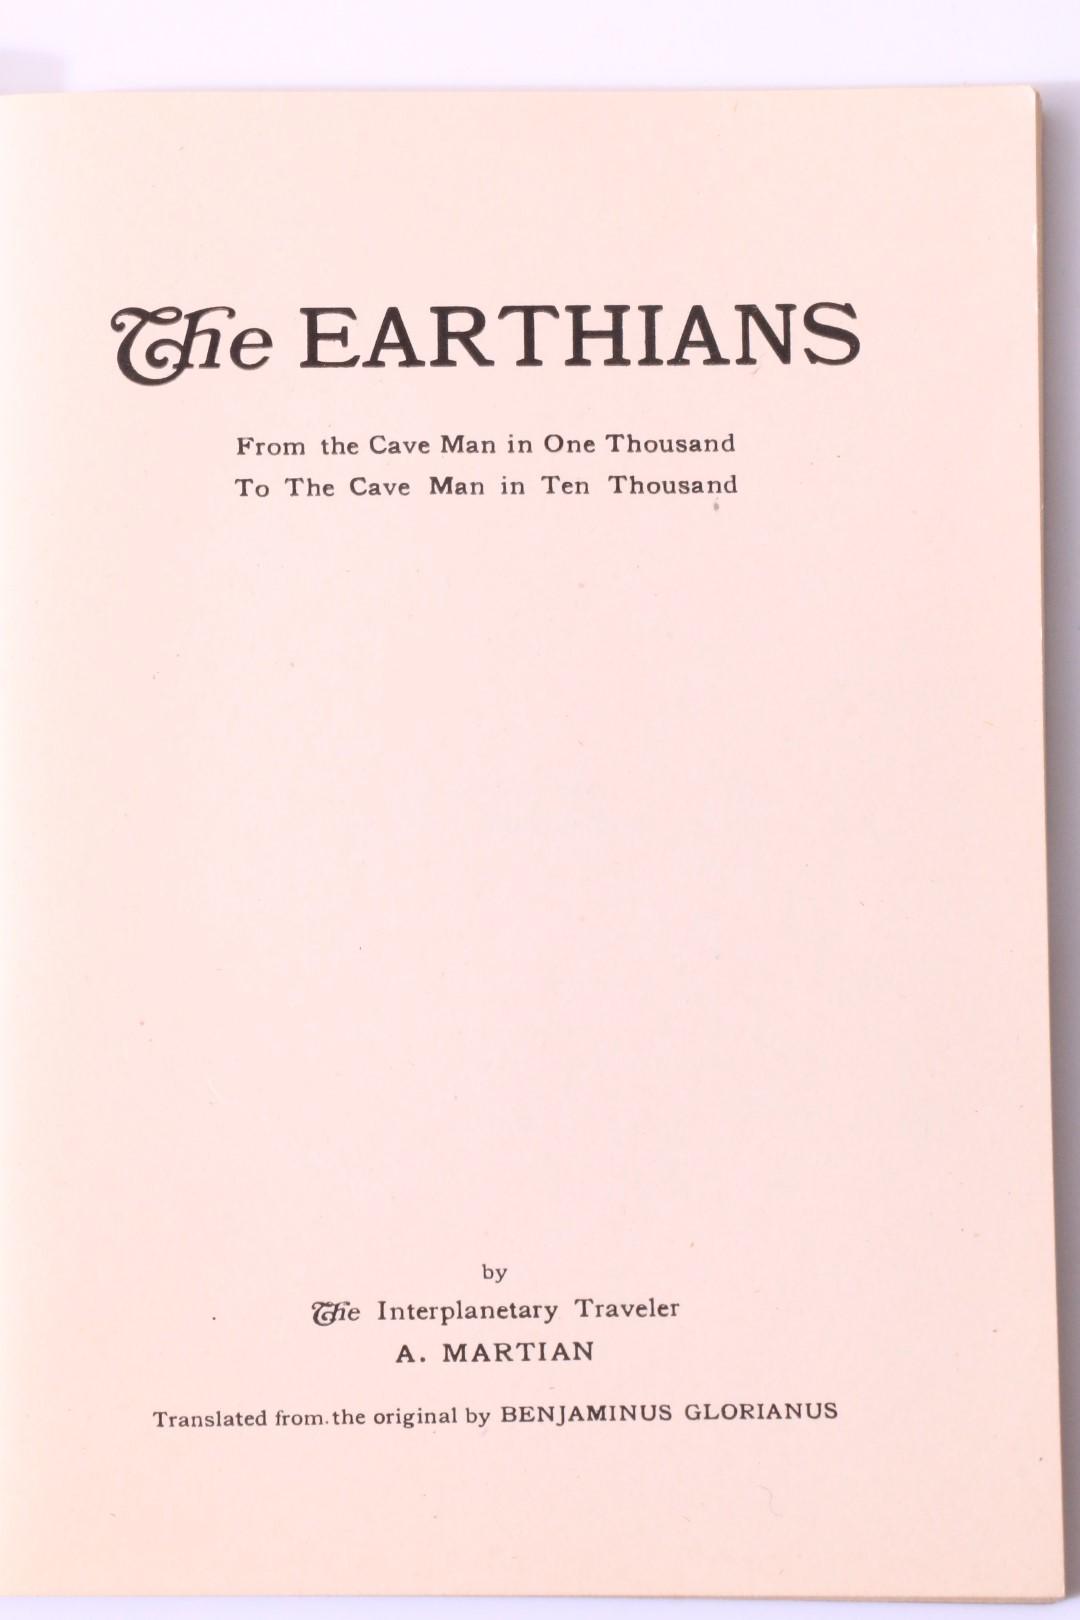 A Martian [Simon Wardwell?] - The Earthians - Privately Printed [?], 1918, First Edition.